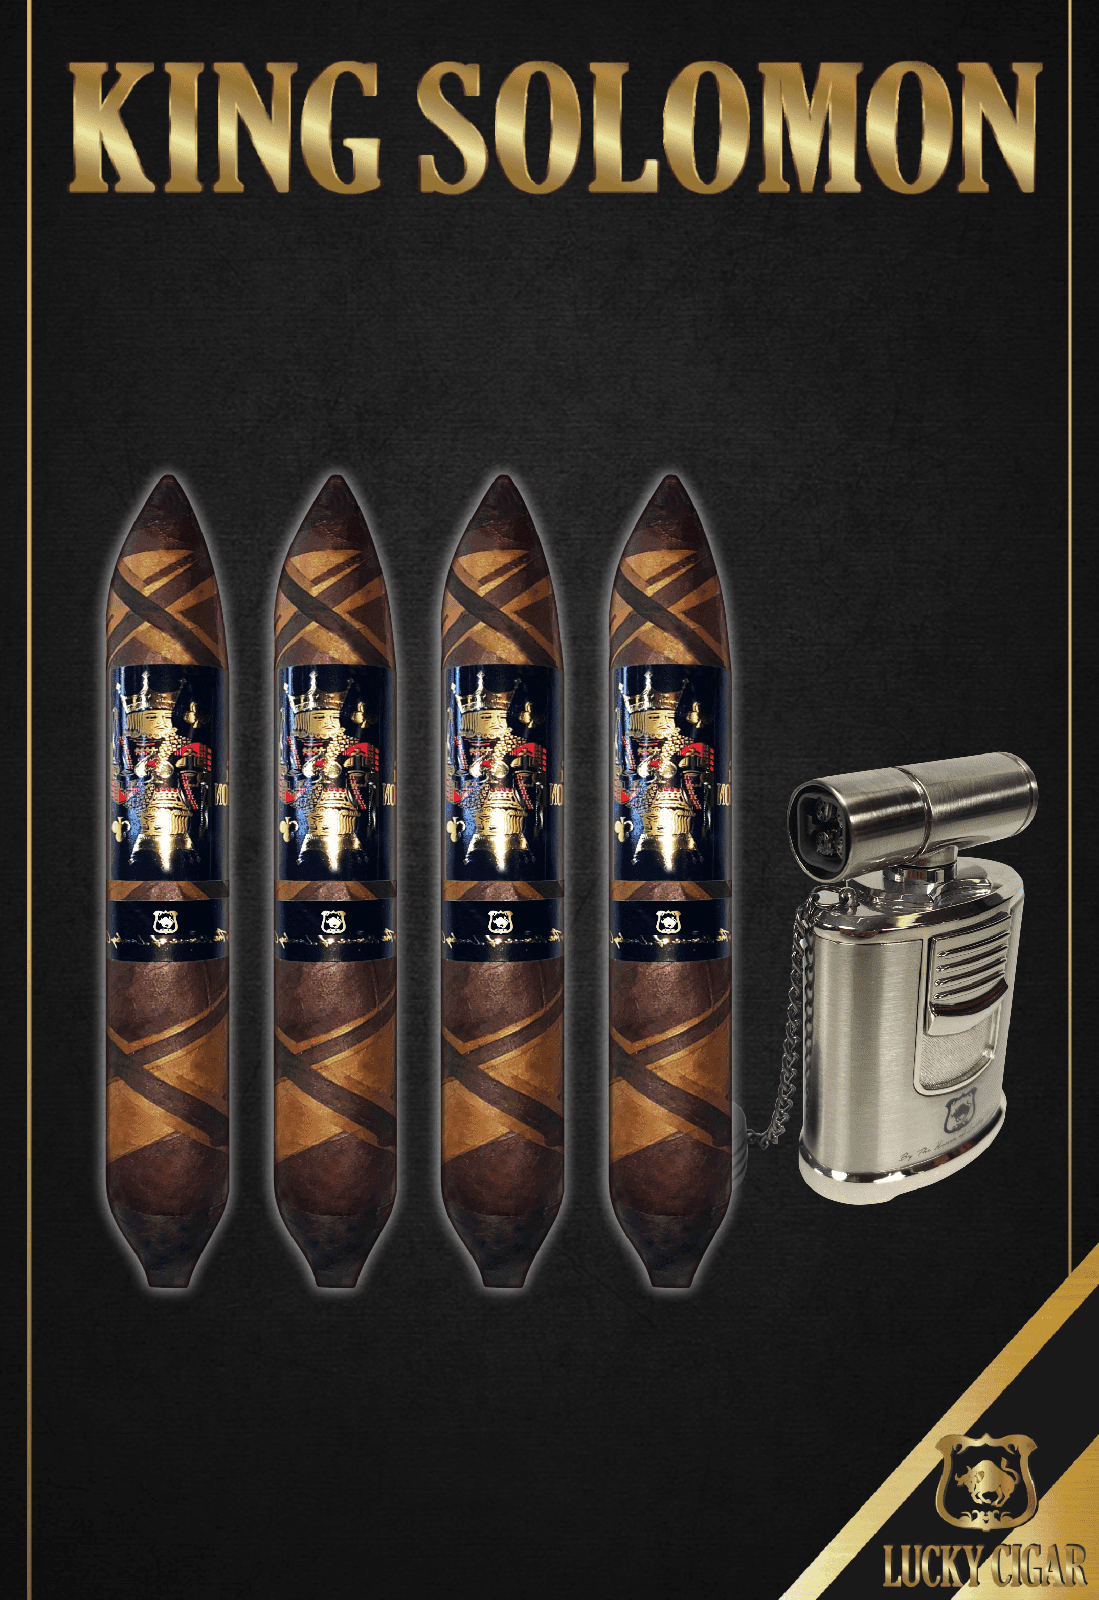 From The King Solomon Series: 4 Solomon 7x60 Cigars with Gun Torch Set